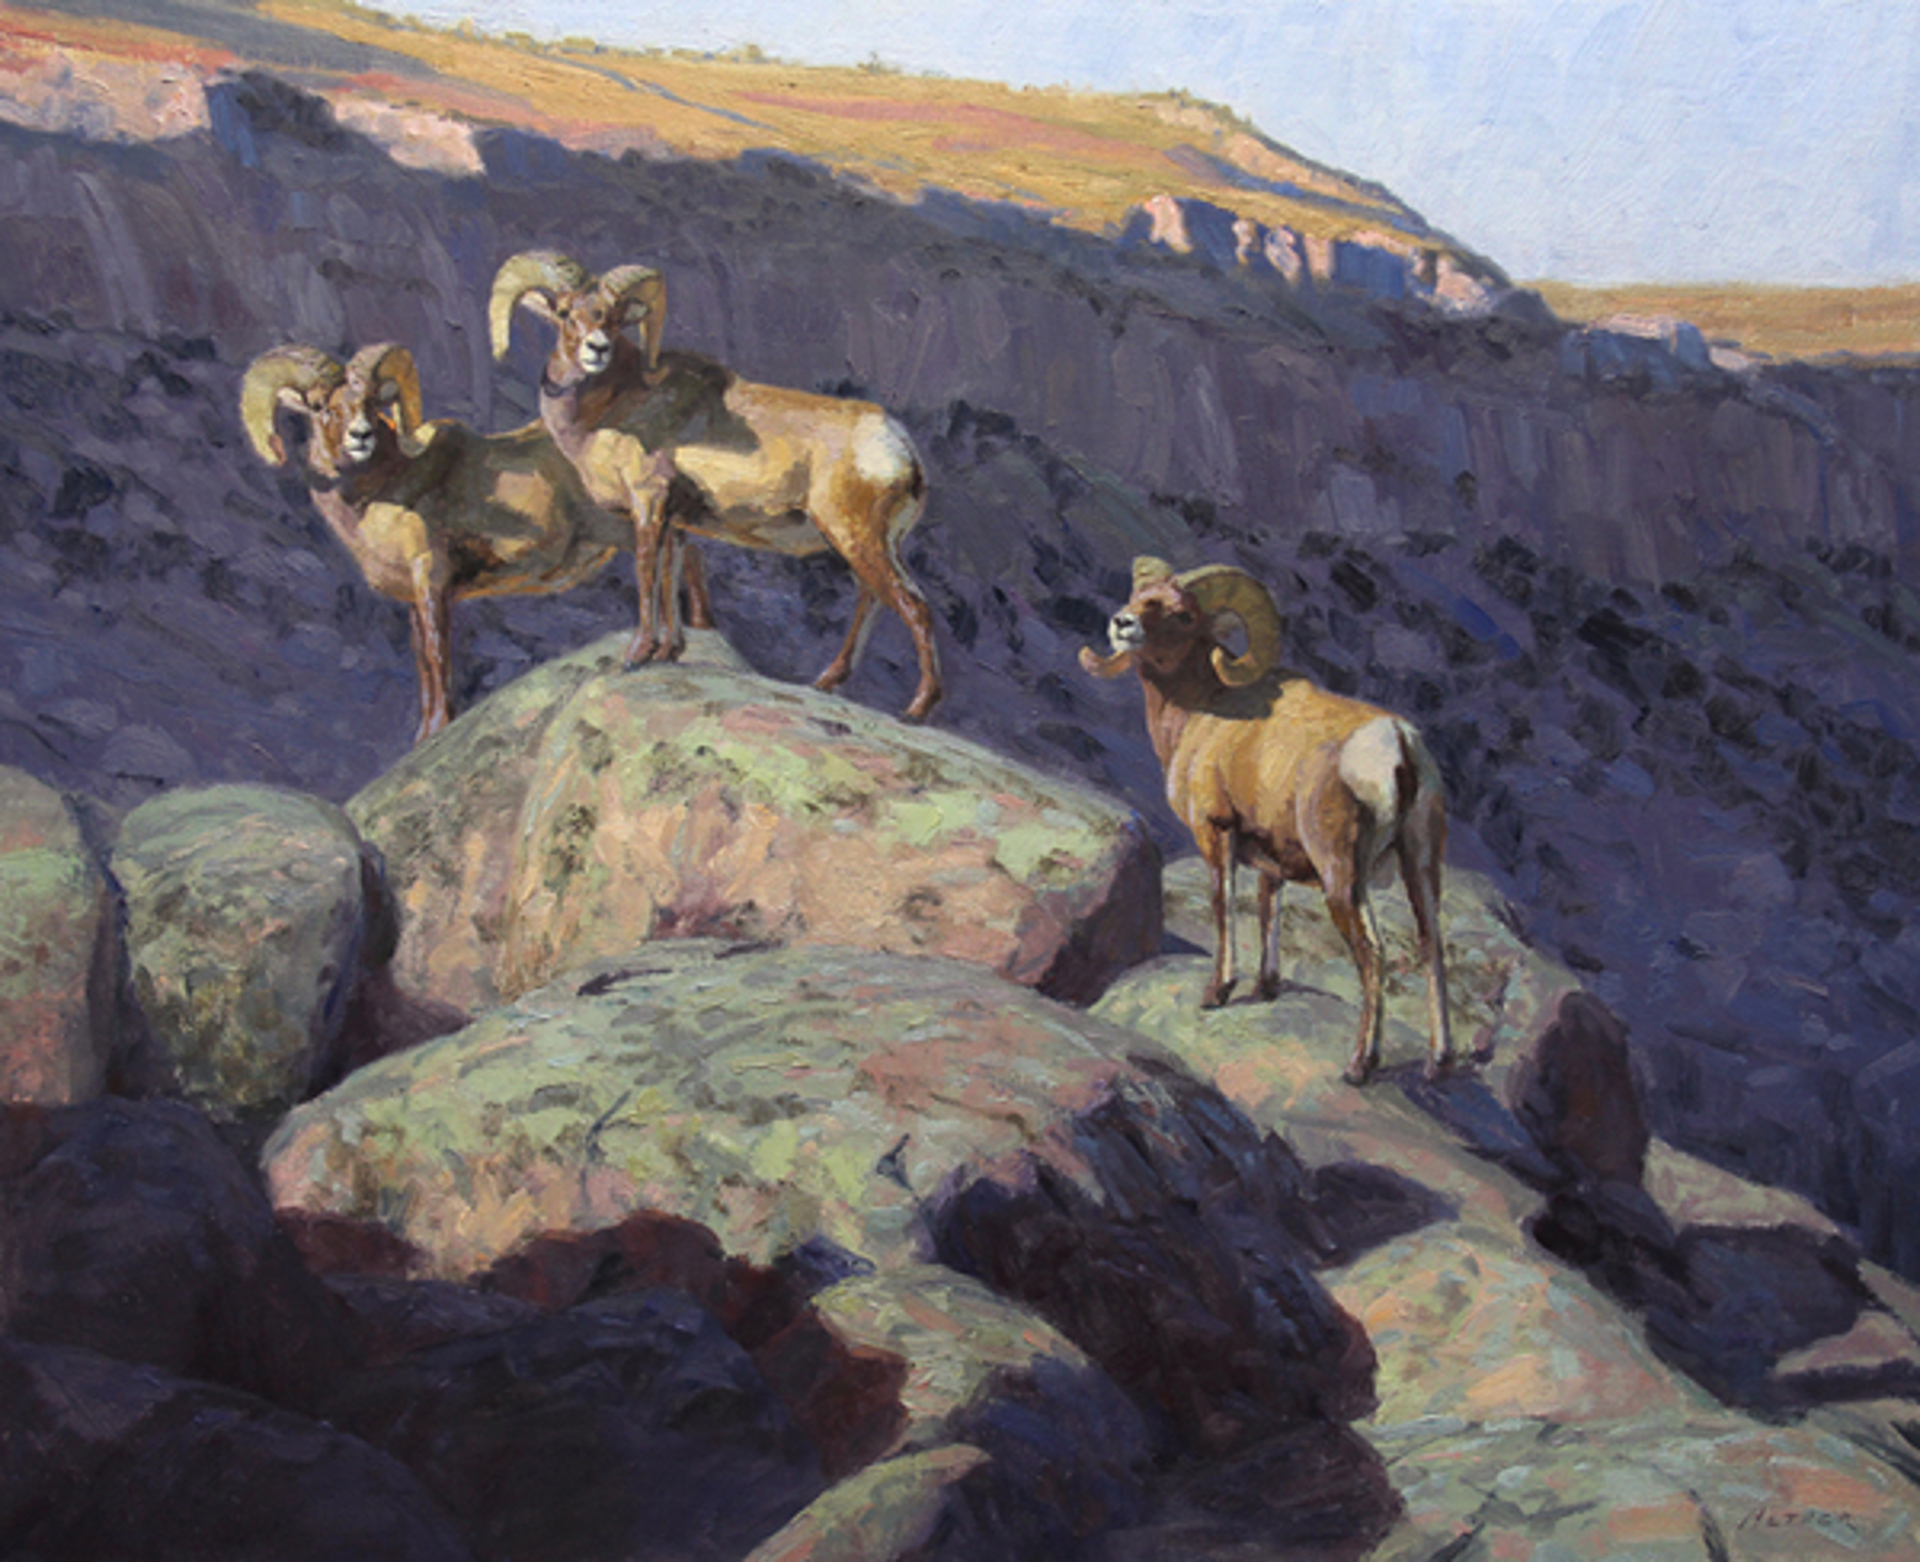 Canyon Shadows (Big Horn Sheep) by William Alther